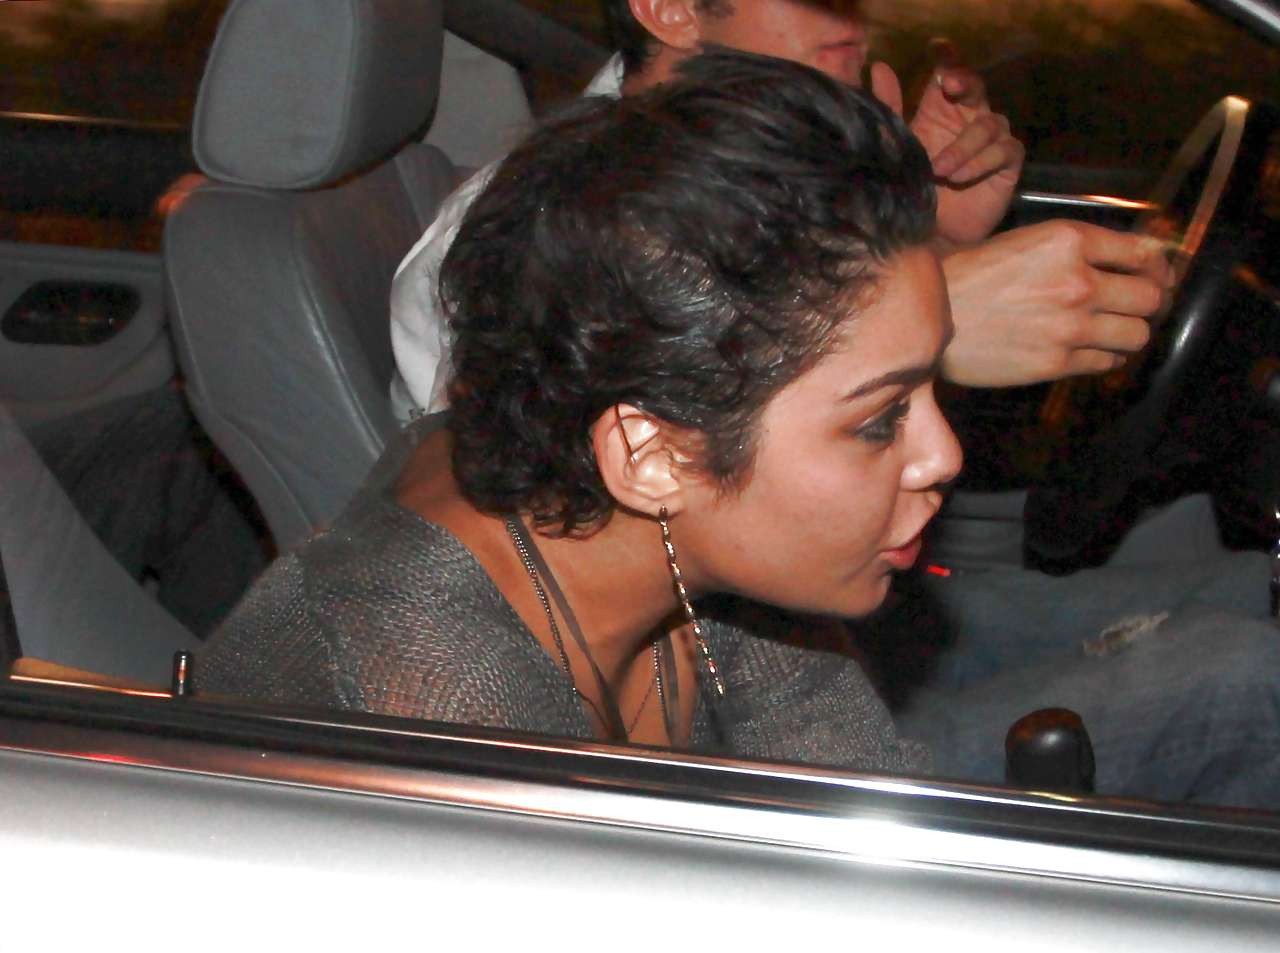 Vanessa Hudgens showing her black bra and sexy in fuck me boots paparazzi pictur #75292019